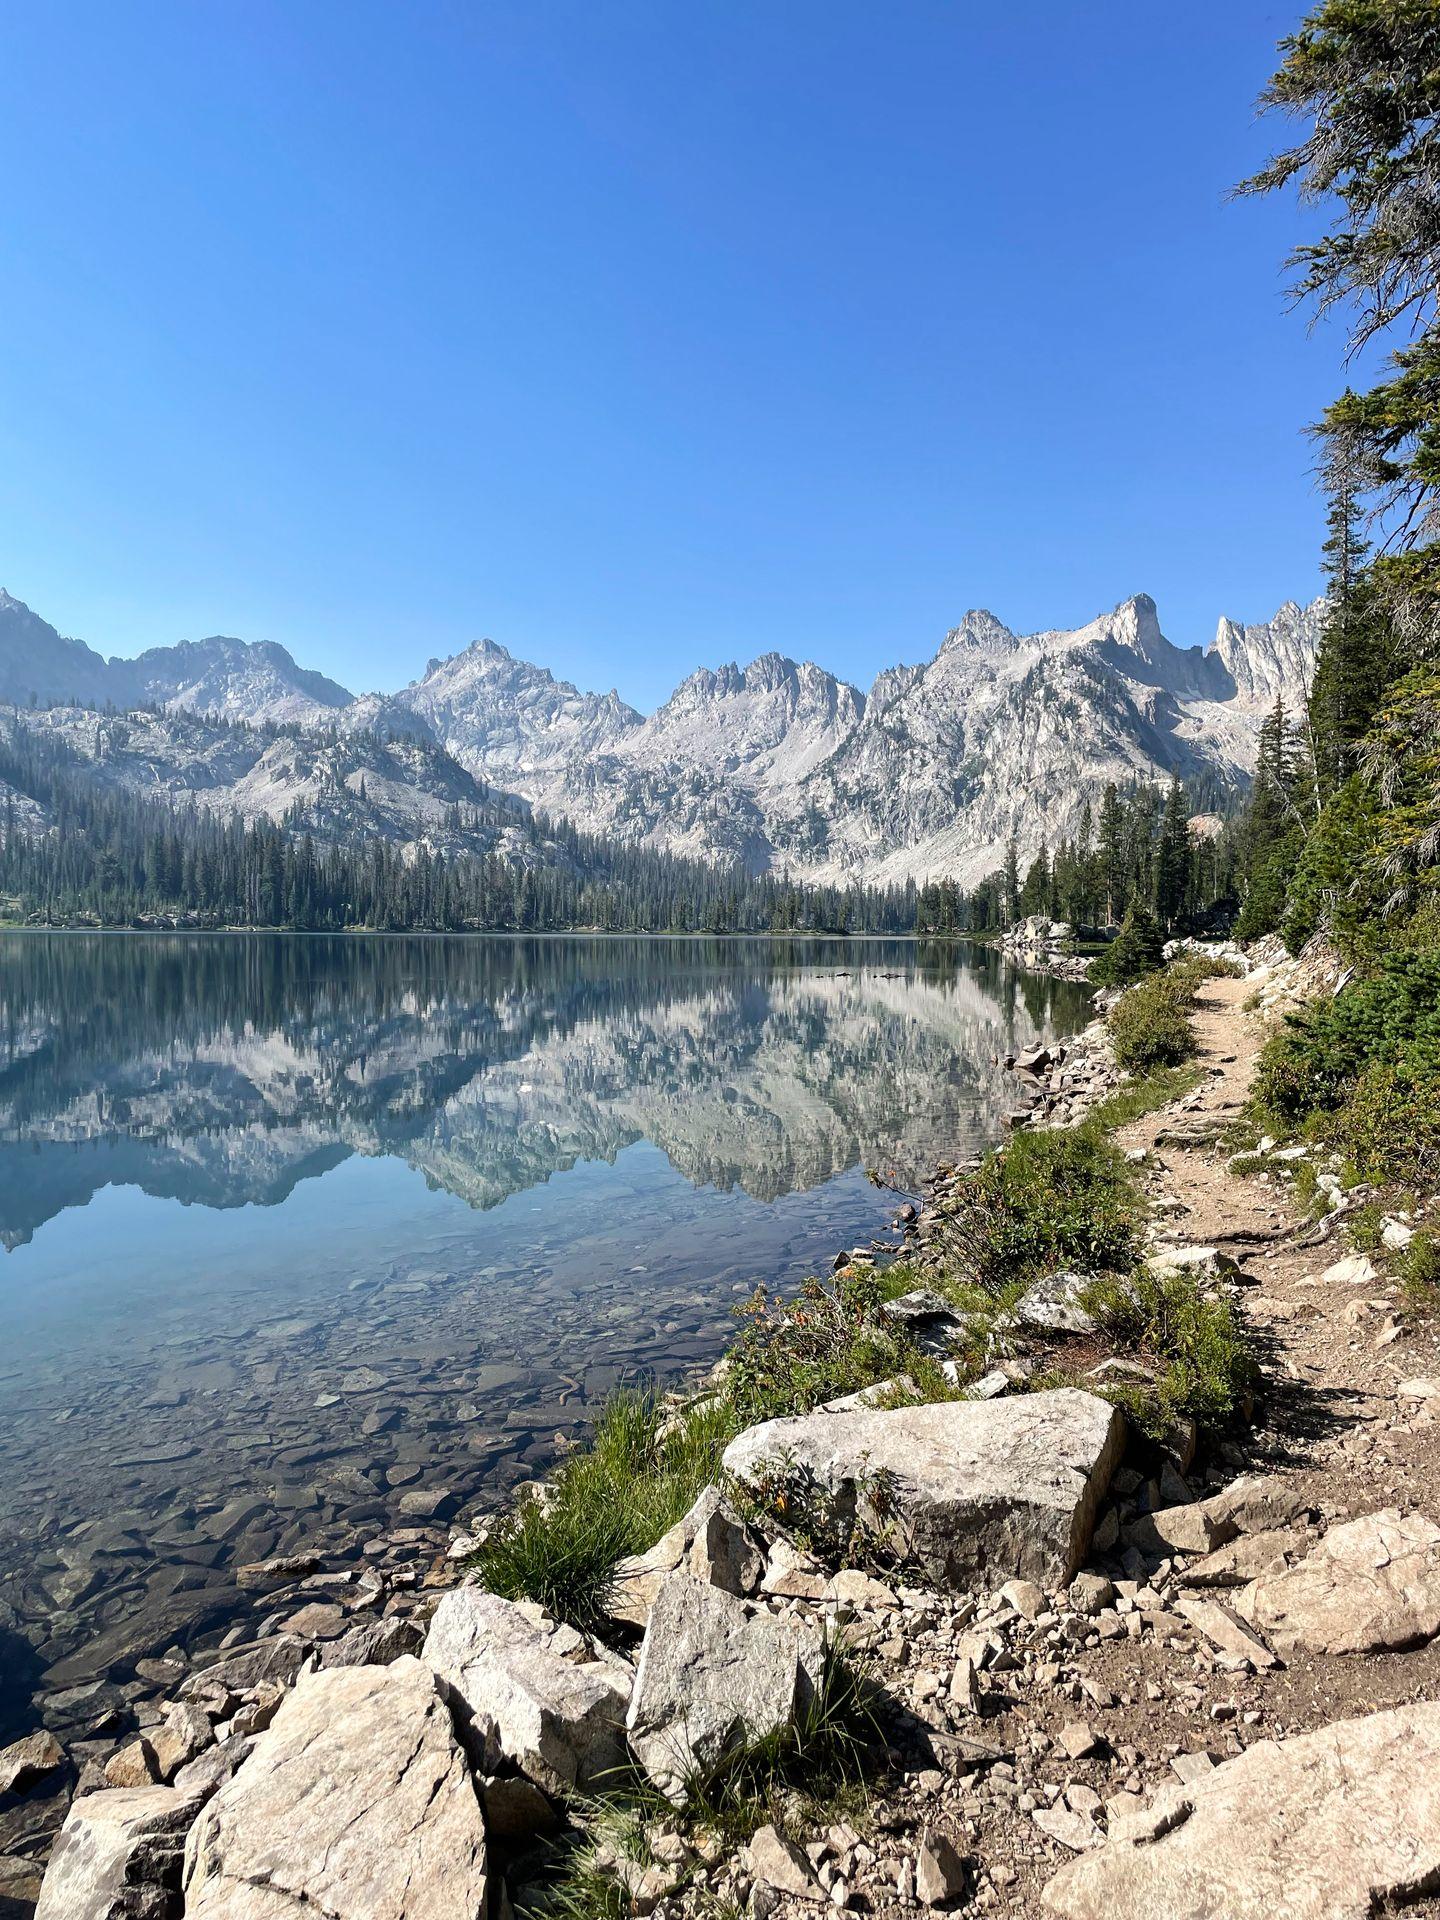 A view of Alice Lake with mountains reflecting in the water. A trail follows along the edge of the water.